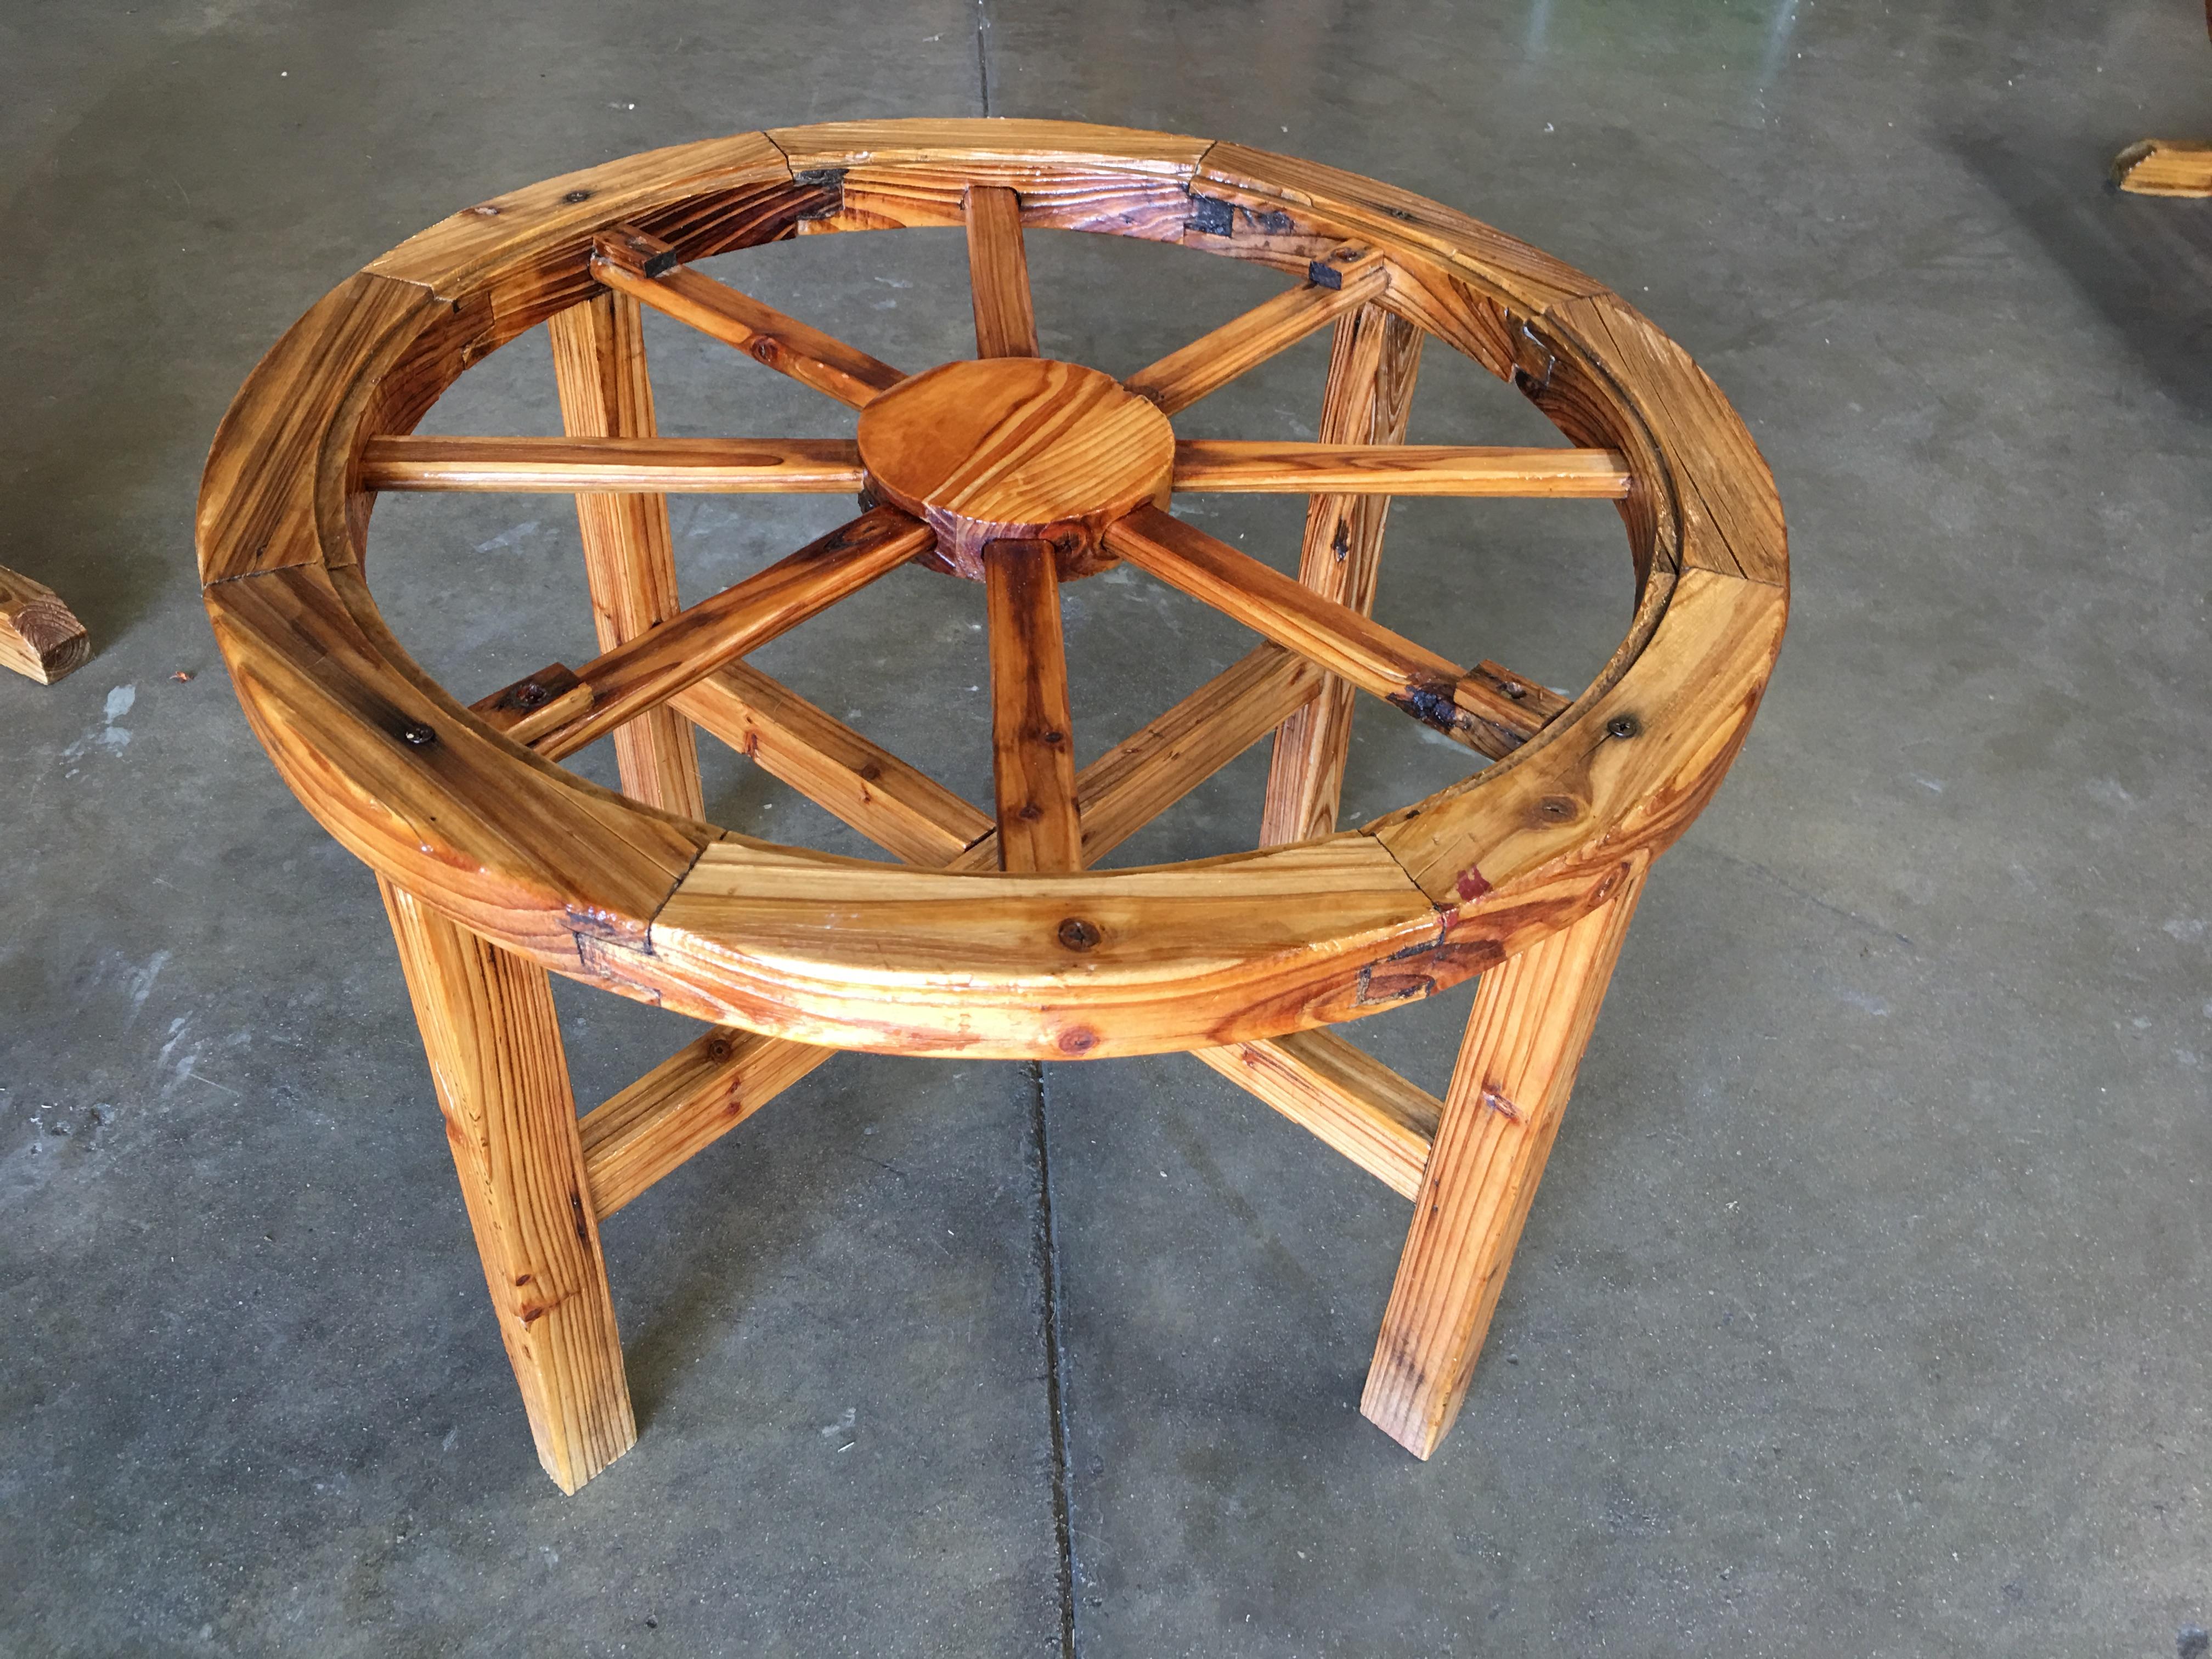 Western Folk Art Wagon Wheel Table and Chairs Set, 1960 For Sale 3